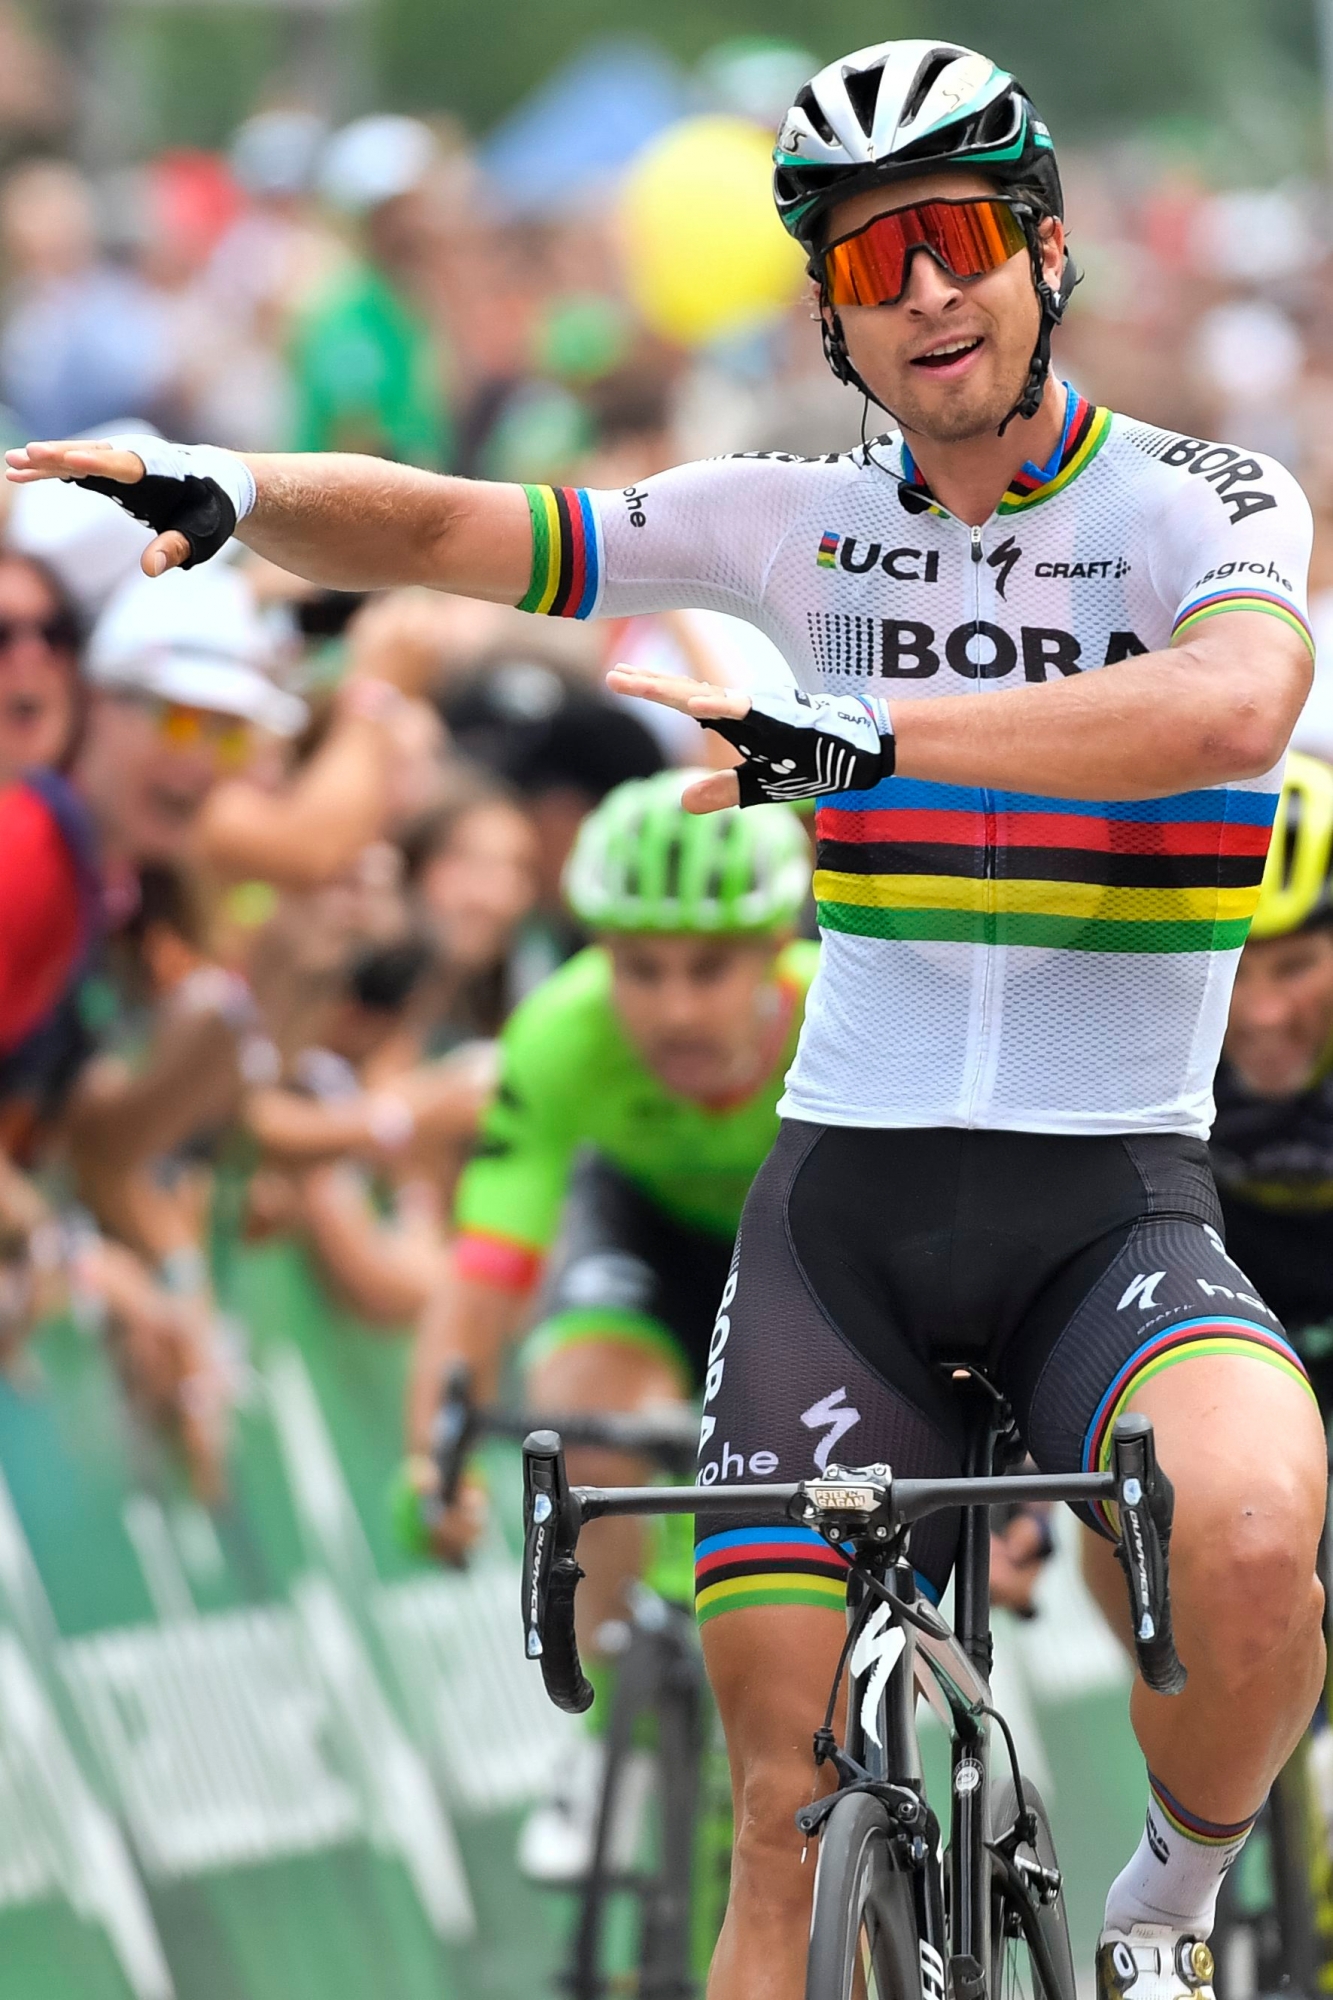 Peter Sagan from Slovakia of Bora - Hansgrohe reacts after winning the 5th stage, a 222 km race from Bex to Cevio, Switzerland, at the 81st Tour de Suisse UCI ProTour cycling race, on Wednesday, June 14, 2017. (KEYSTONE/Gian Ehrenzeller) SWITZERLAND CYCLING TOUR DE SUISSE 2017